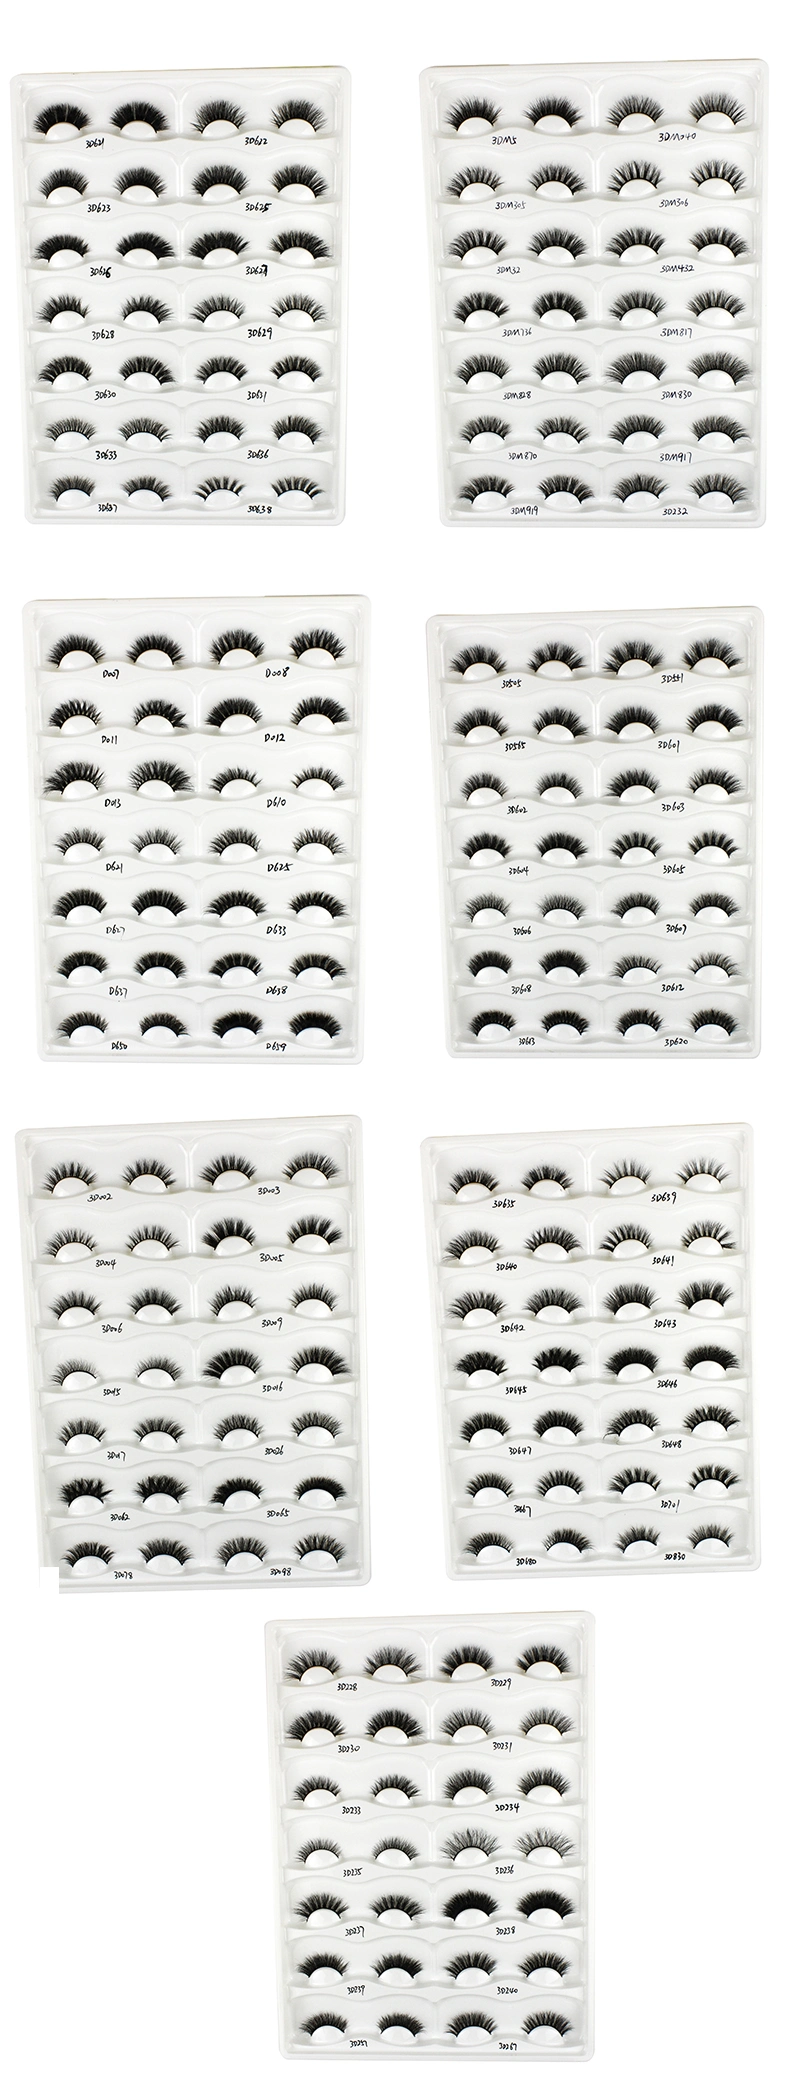 Worldbeauty Private Label Faux Mink Eyelashes 3D Mink Lashes